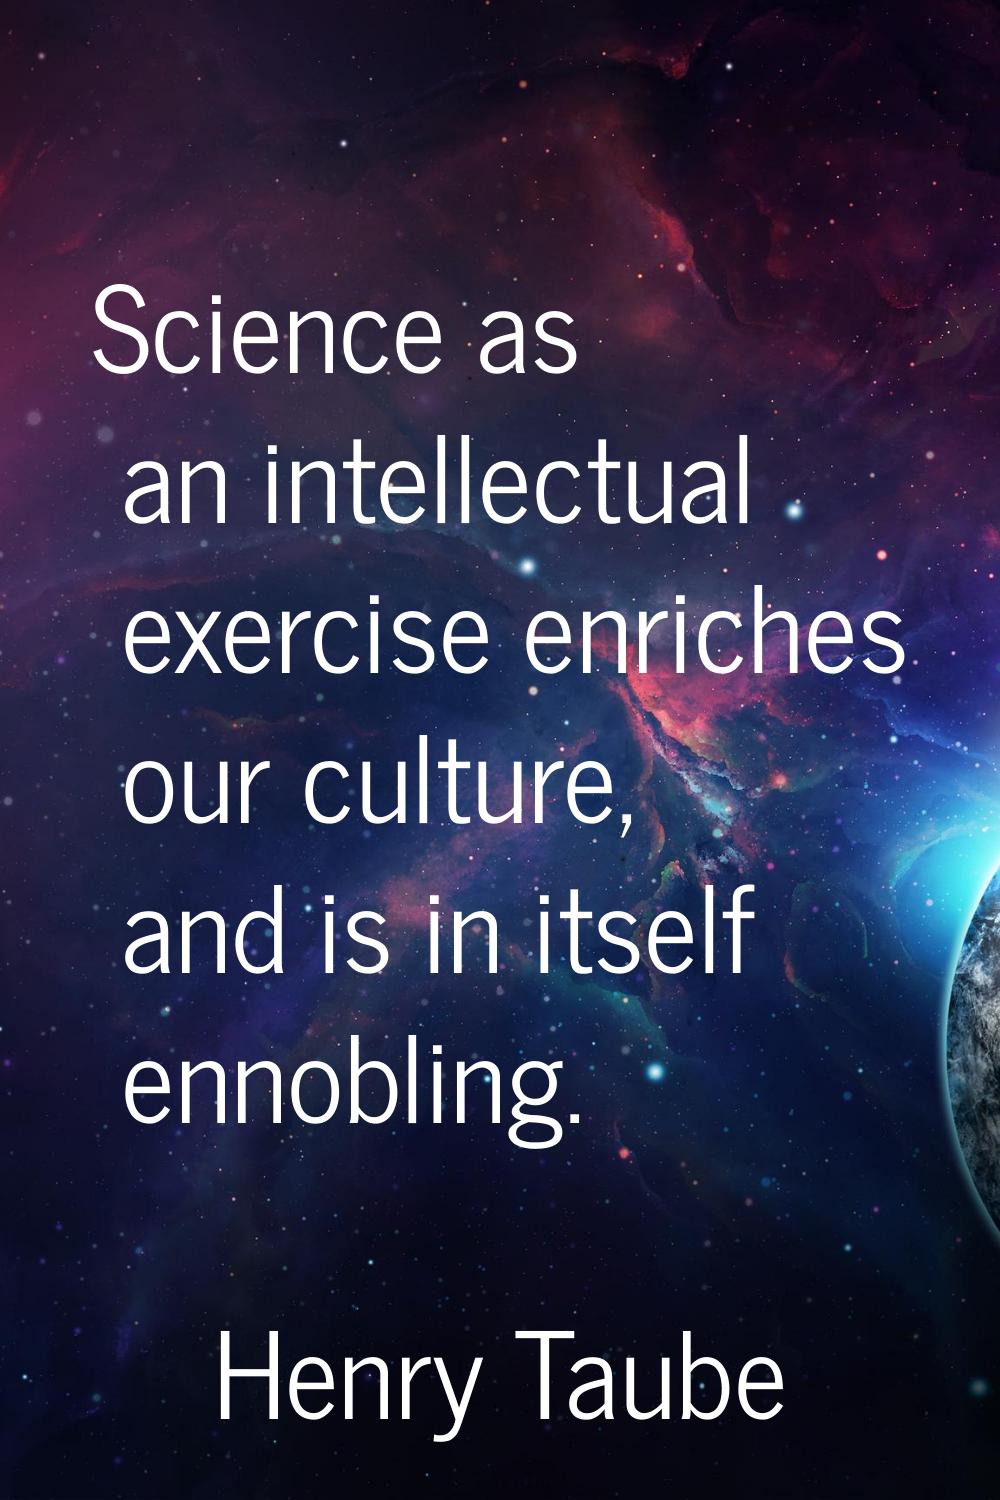 Science as an intellectual exercise enriches our culture, and is in itself ennobling.